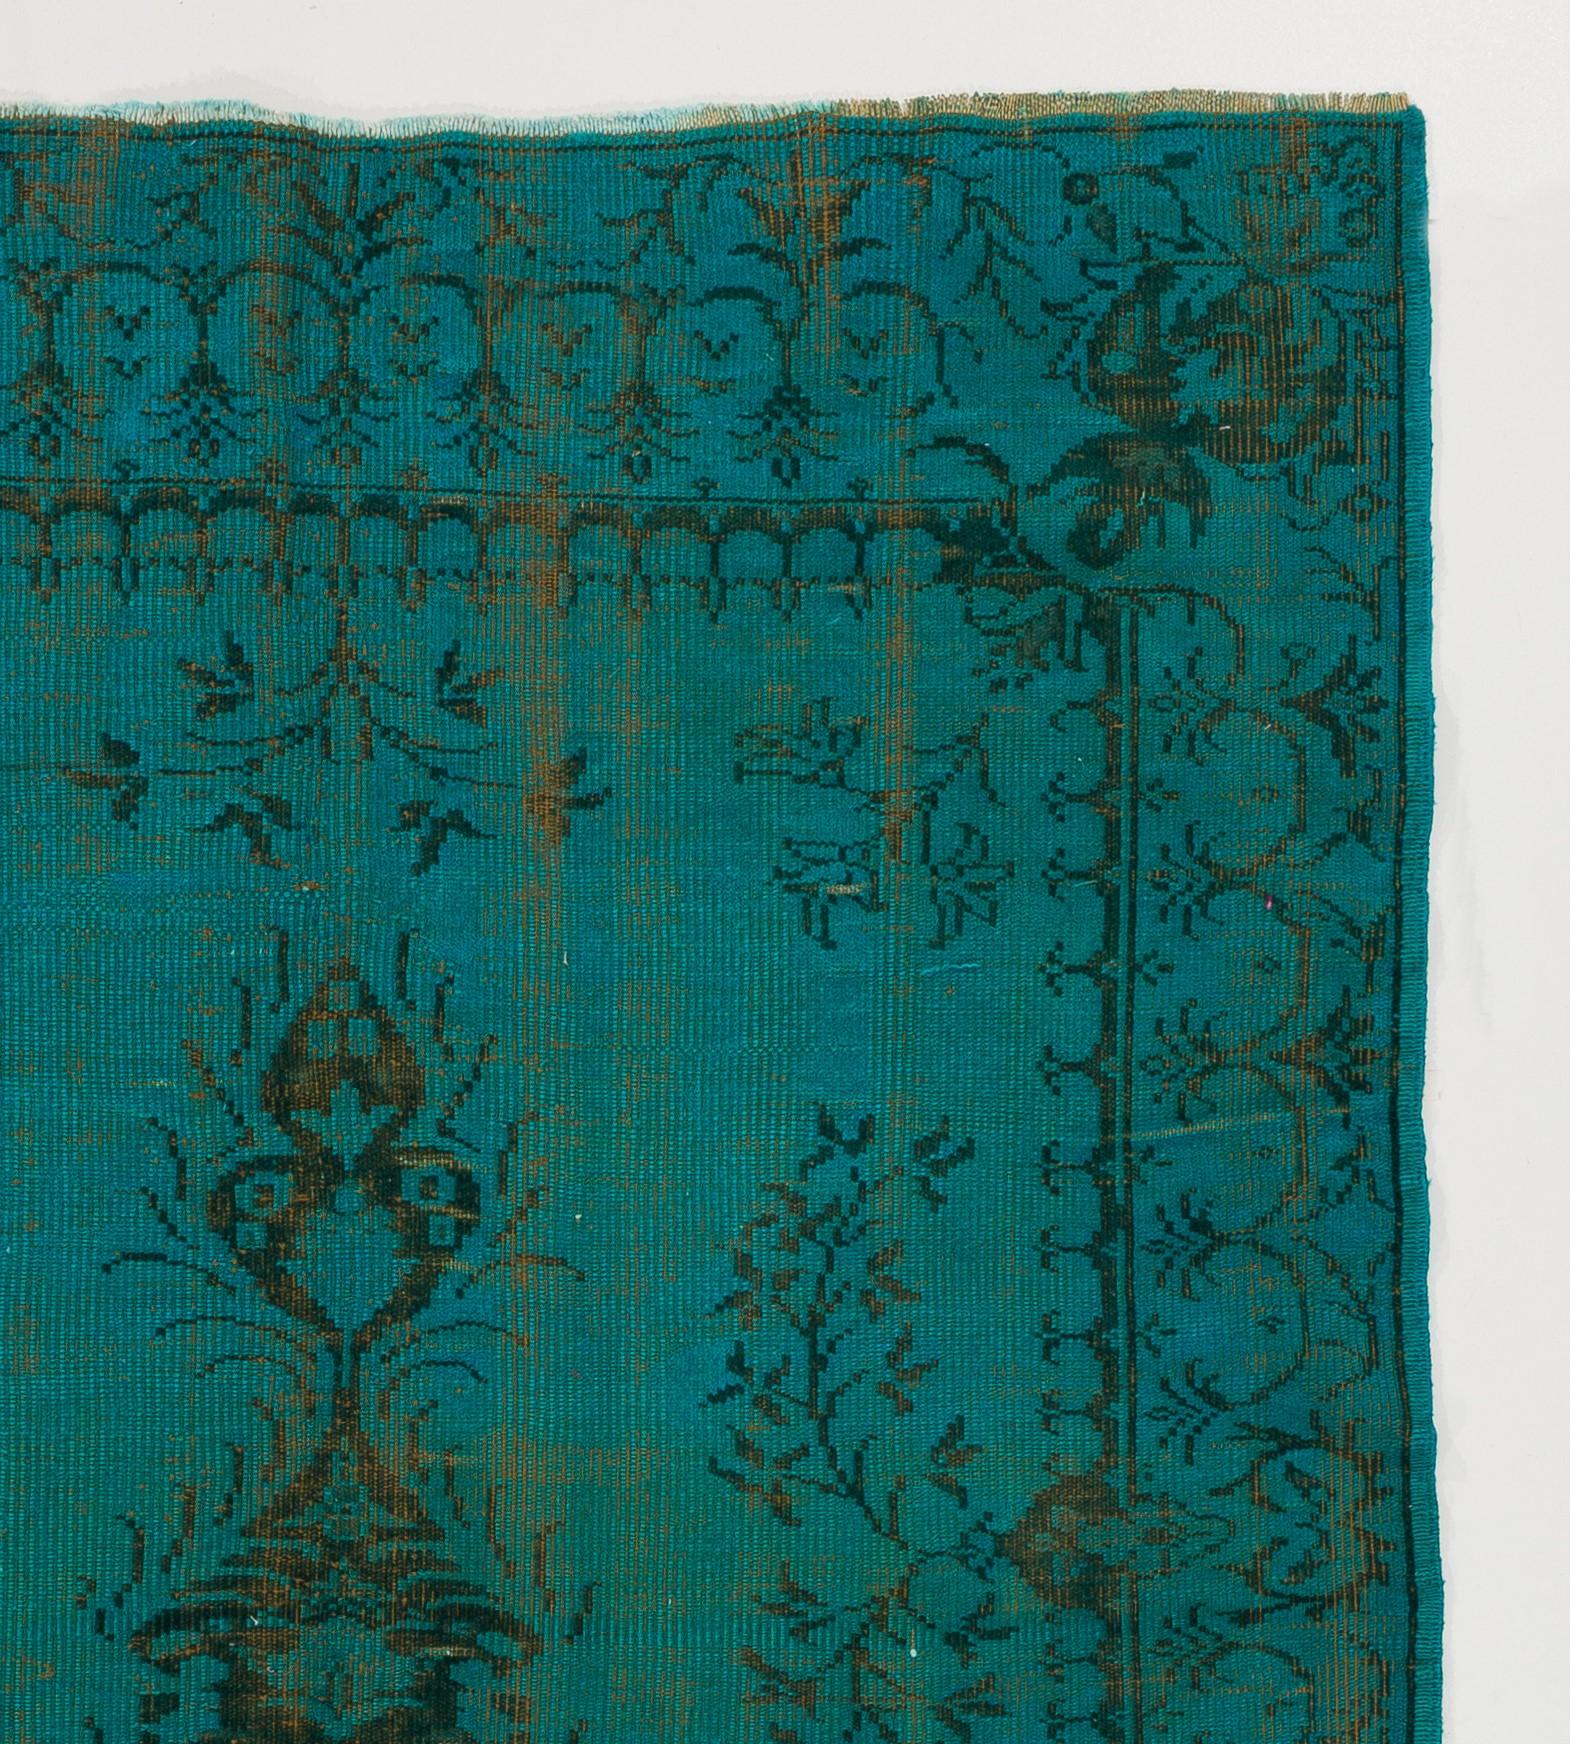 Hand-Woven 5.8x9.3 Ft Vintage Hand-knotted Turkish Wool Medallion Rug Over-dyed in Teal